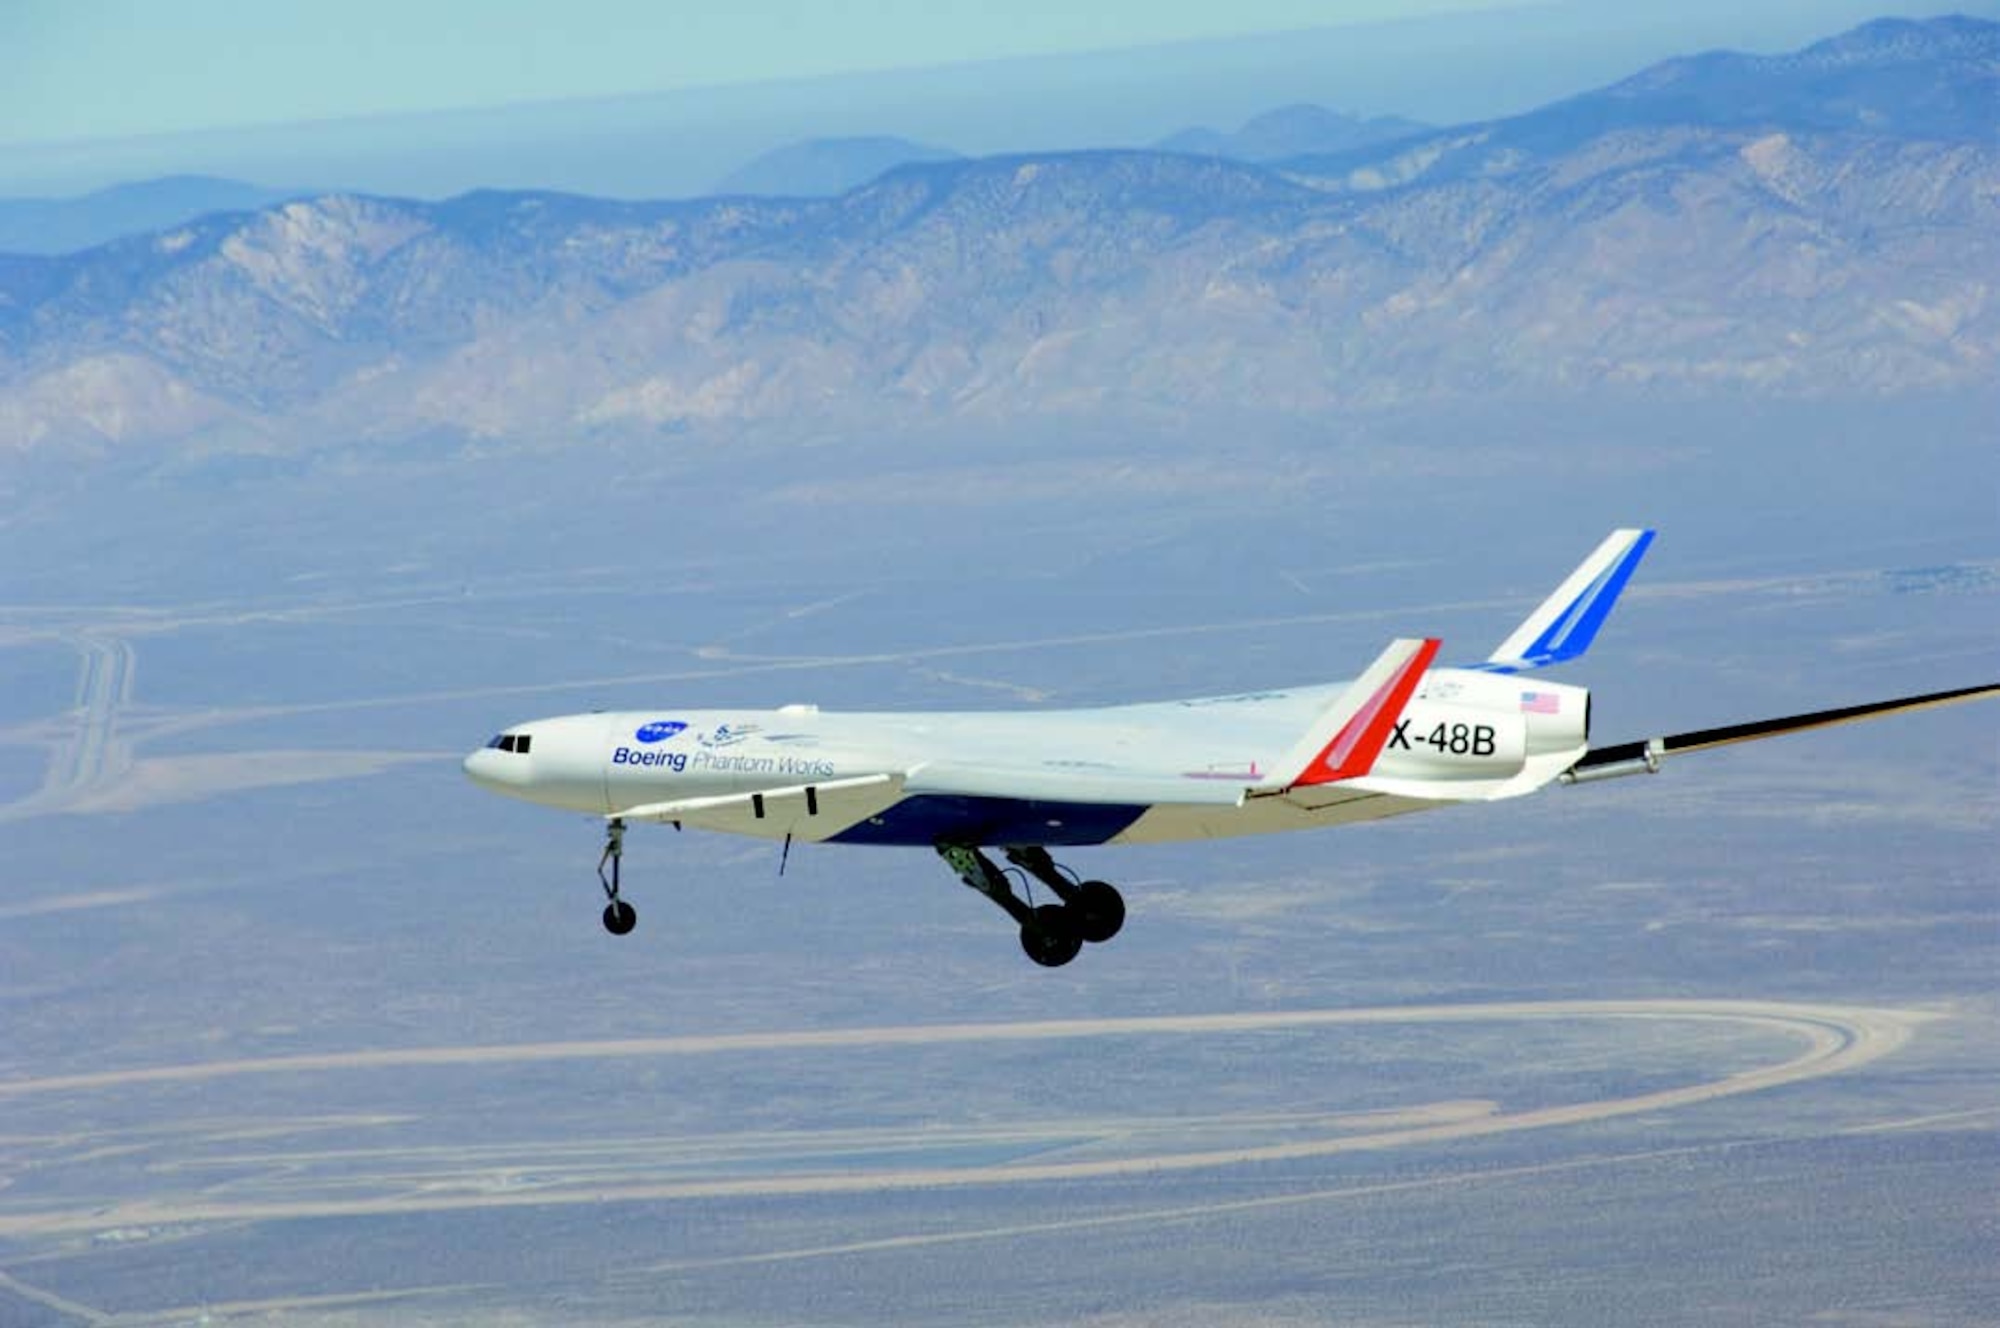 The X-48B Blended-Wing Body research vehicle (photo courtesy of Boeing)